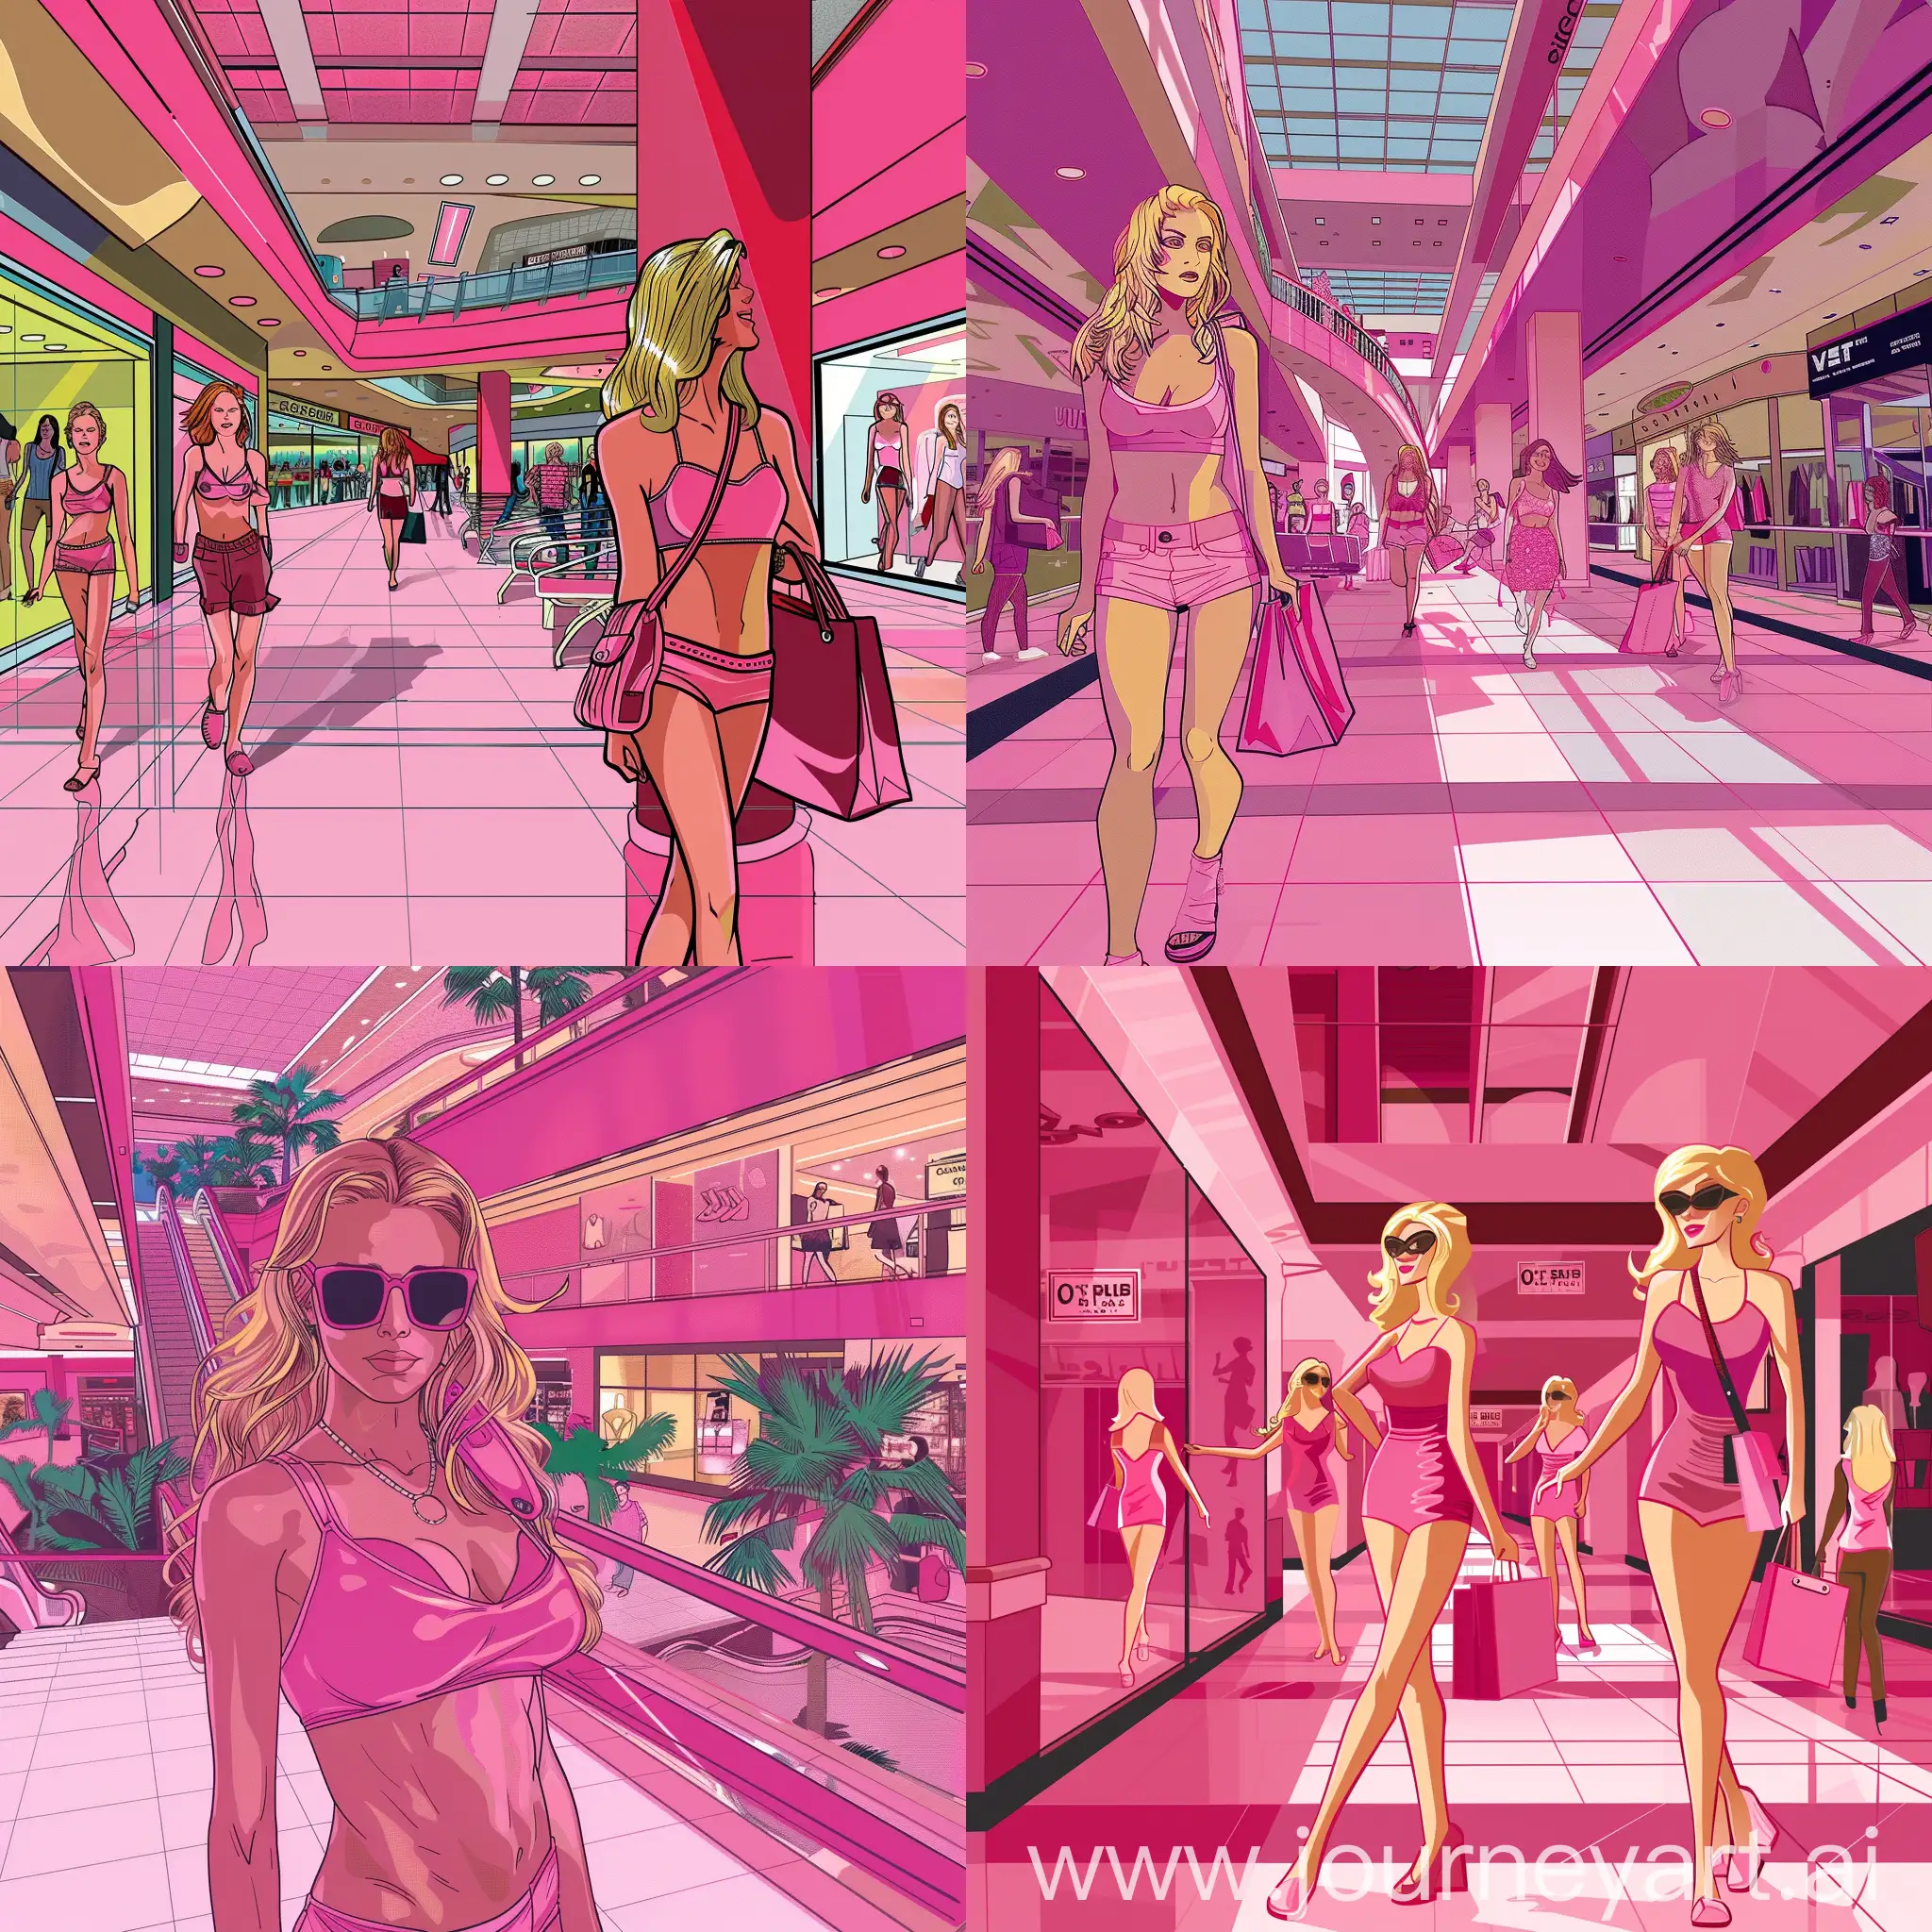 Hot-Pink-Mall-Scene-Vibrant-Blonde-Shoppers-in-Comic-Style